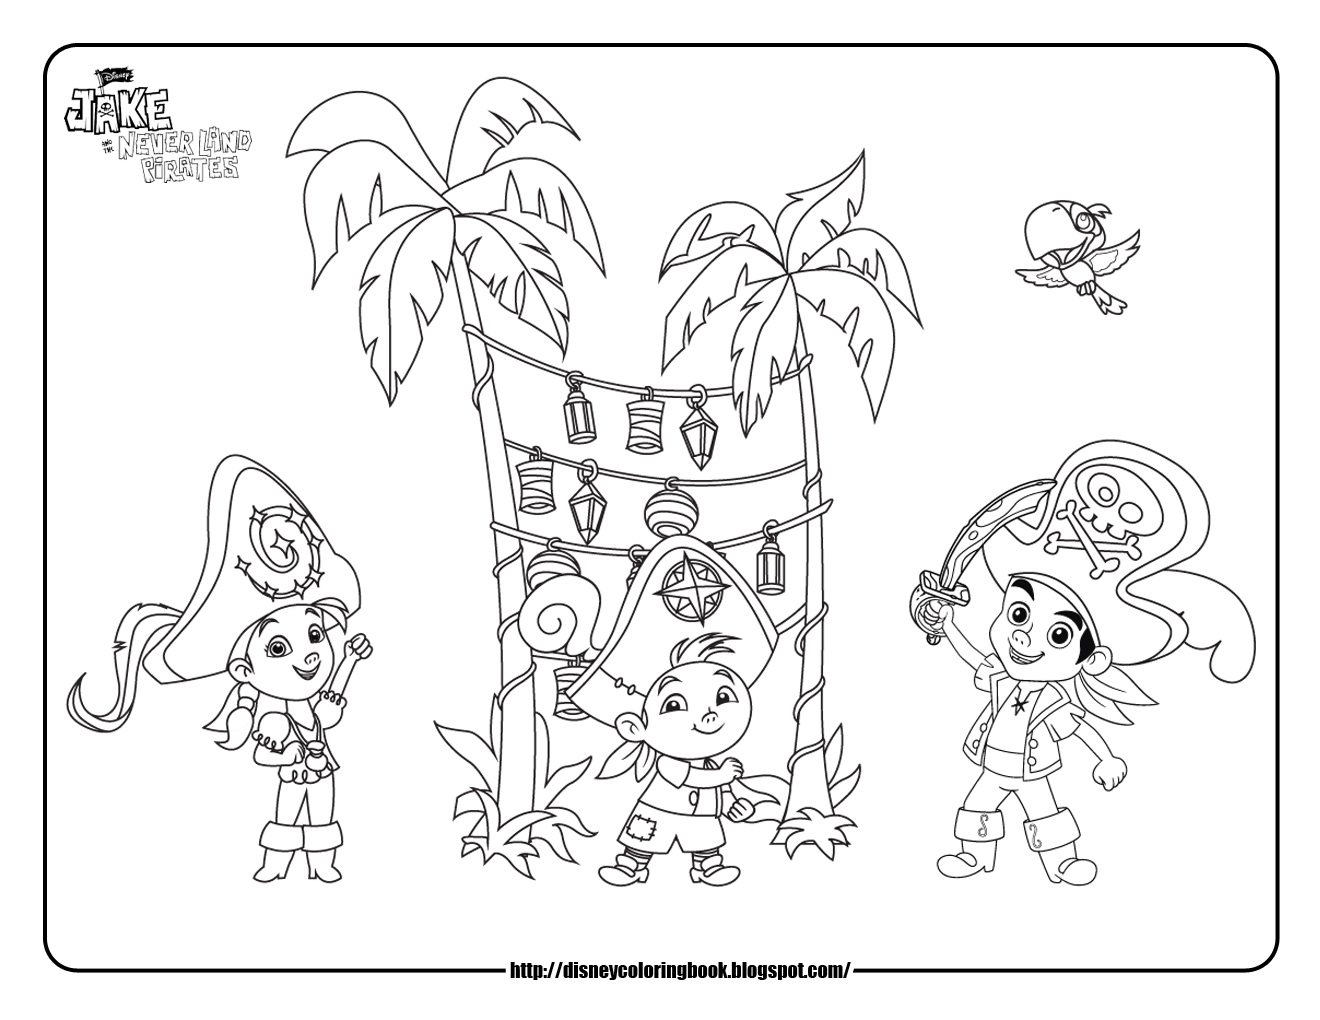 Jake and the Neverland Pirates 3: Free Disney Coloring Sheets | Team colors